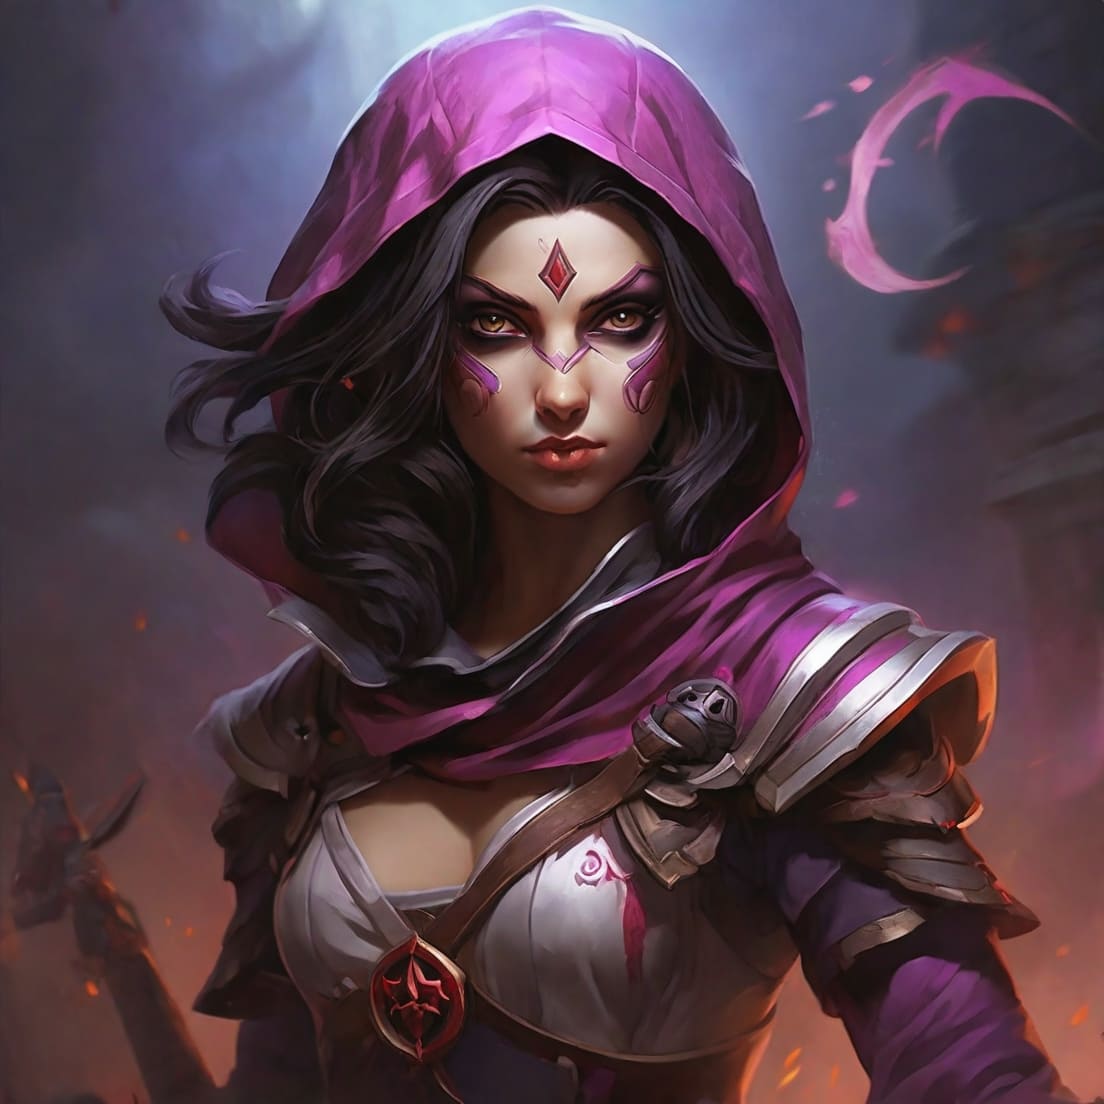 templar assassin, fairy tale character, girl knight preview image.